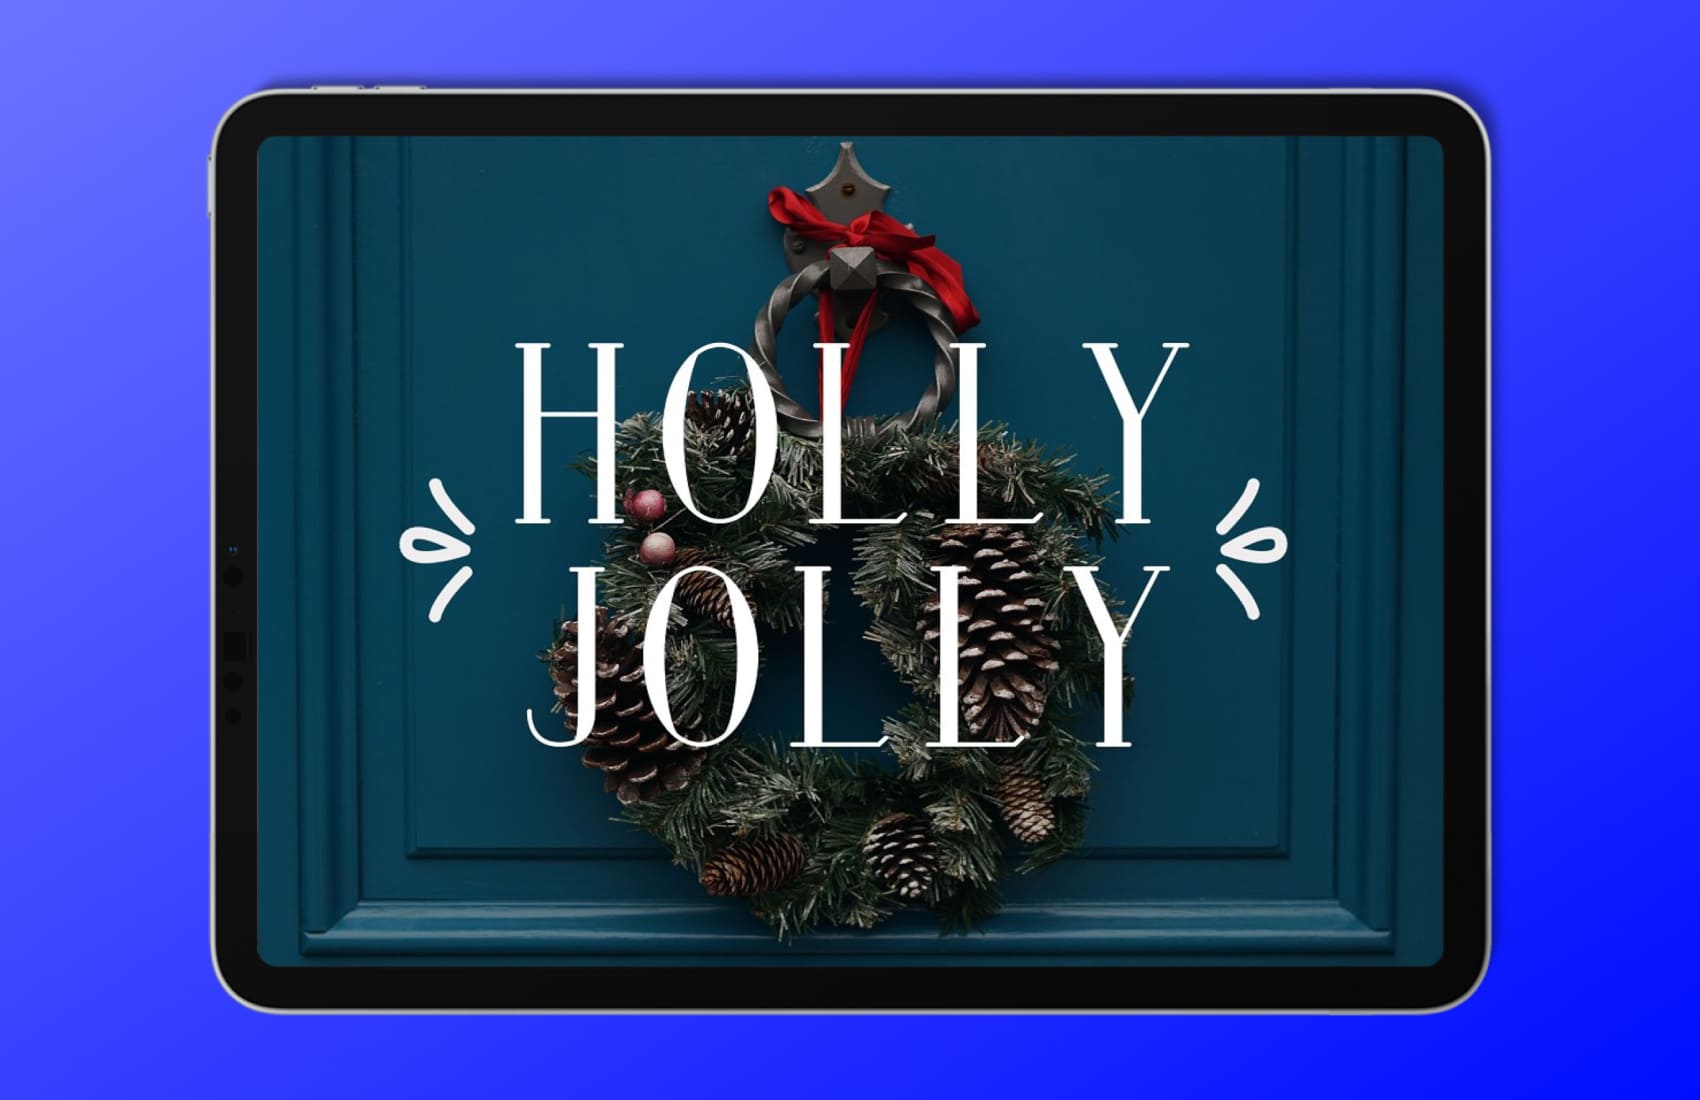 Wintery - A Serif Font Family"Holly Jolly Preview" On The Tablet.